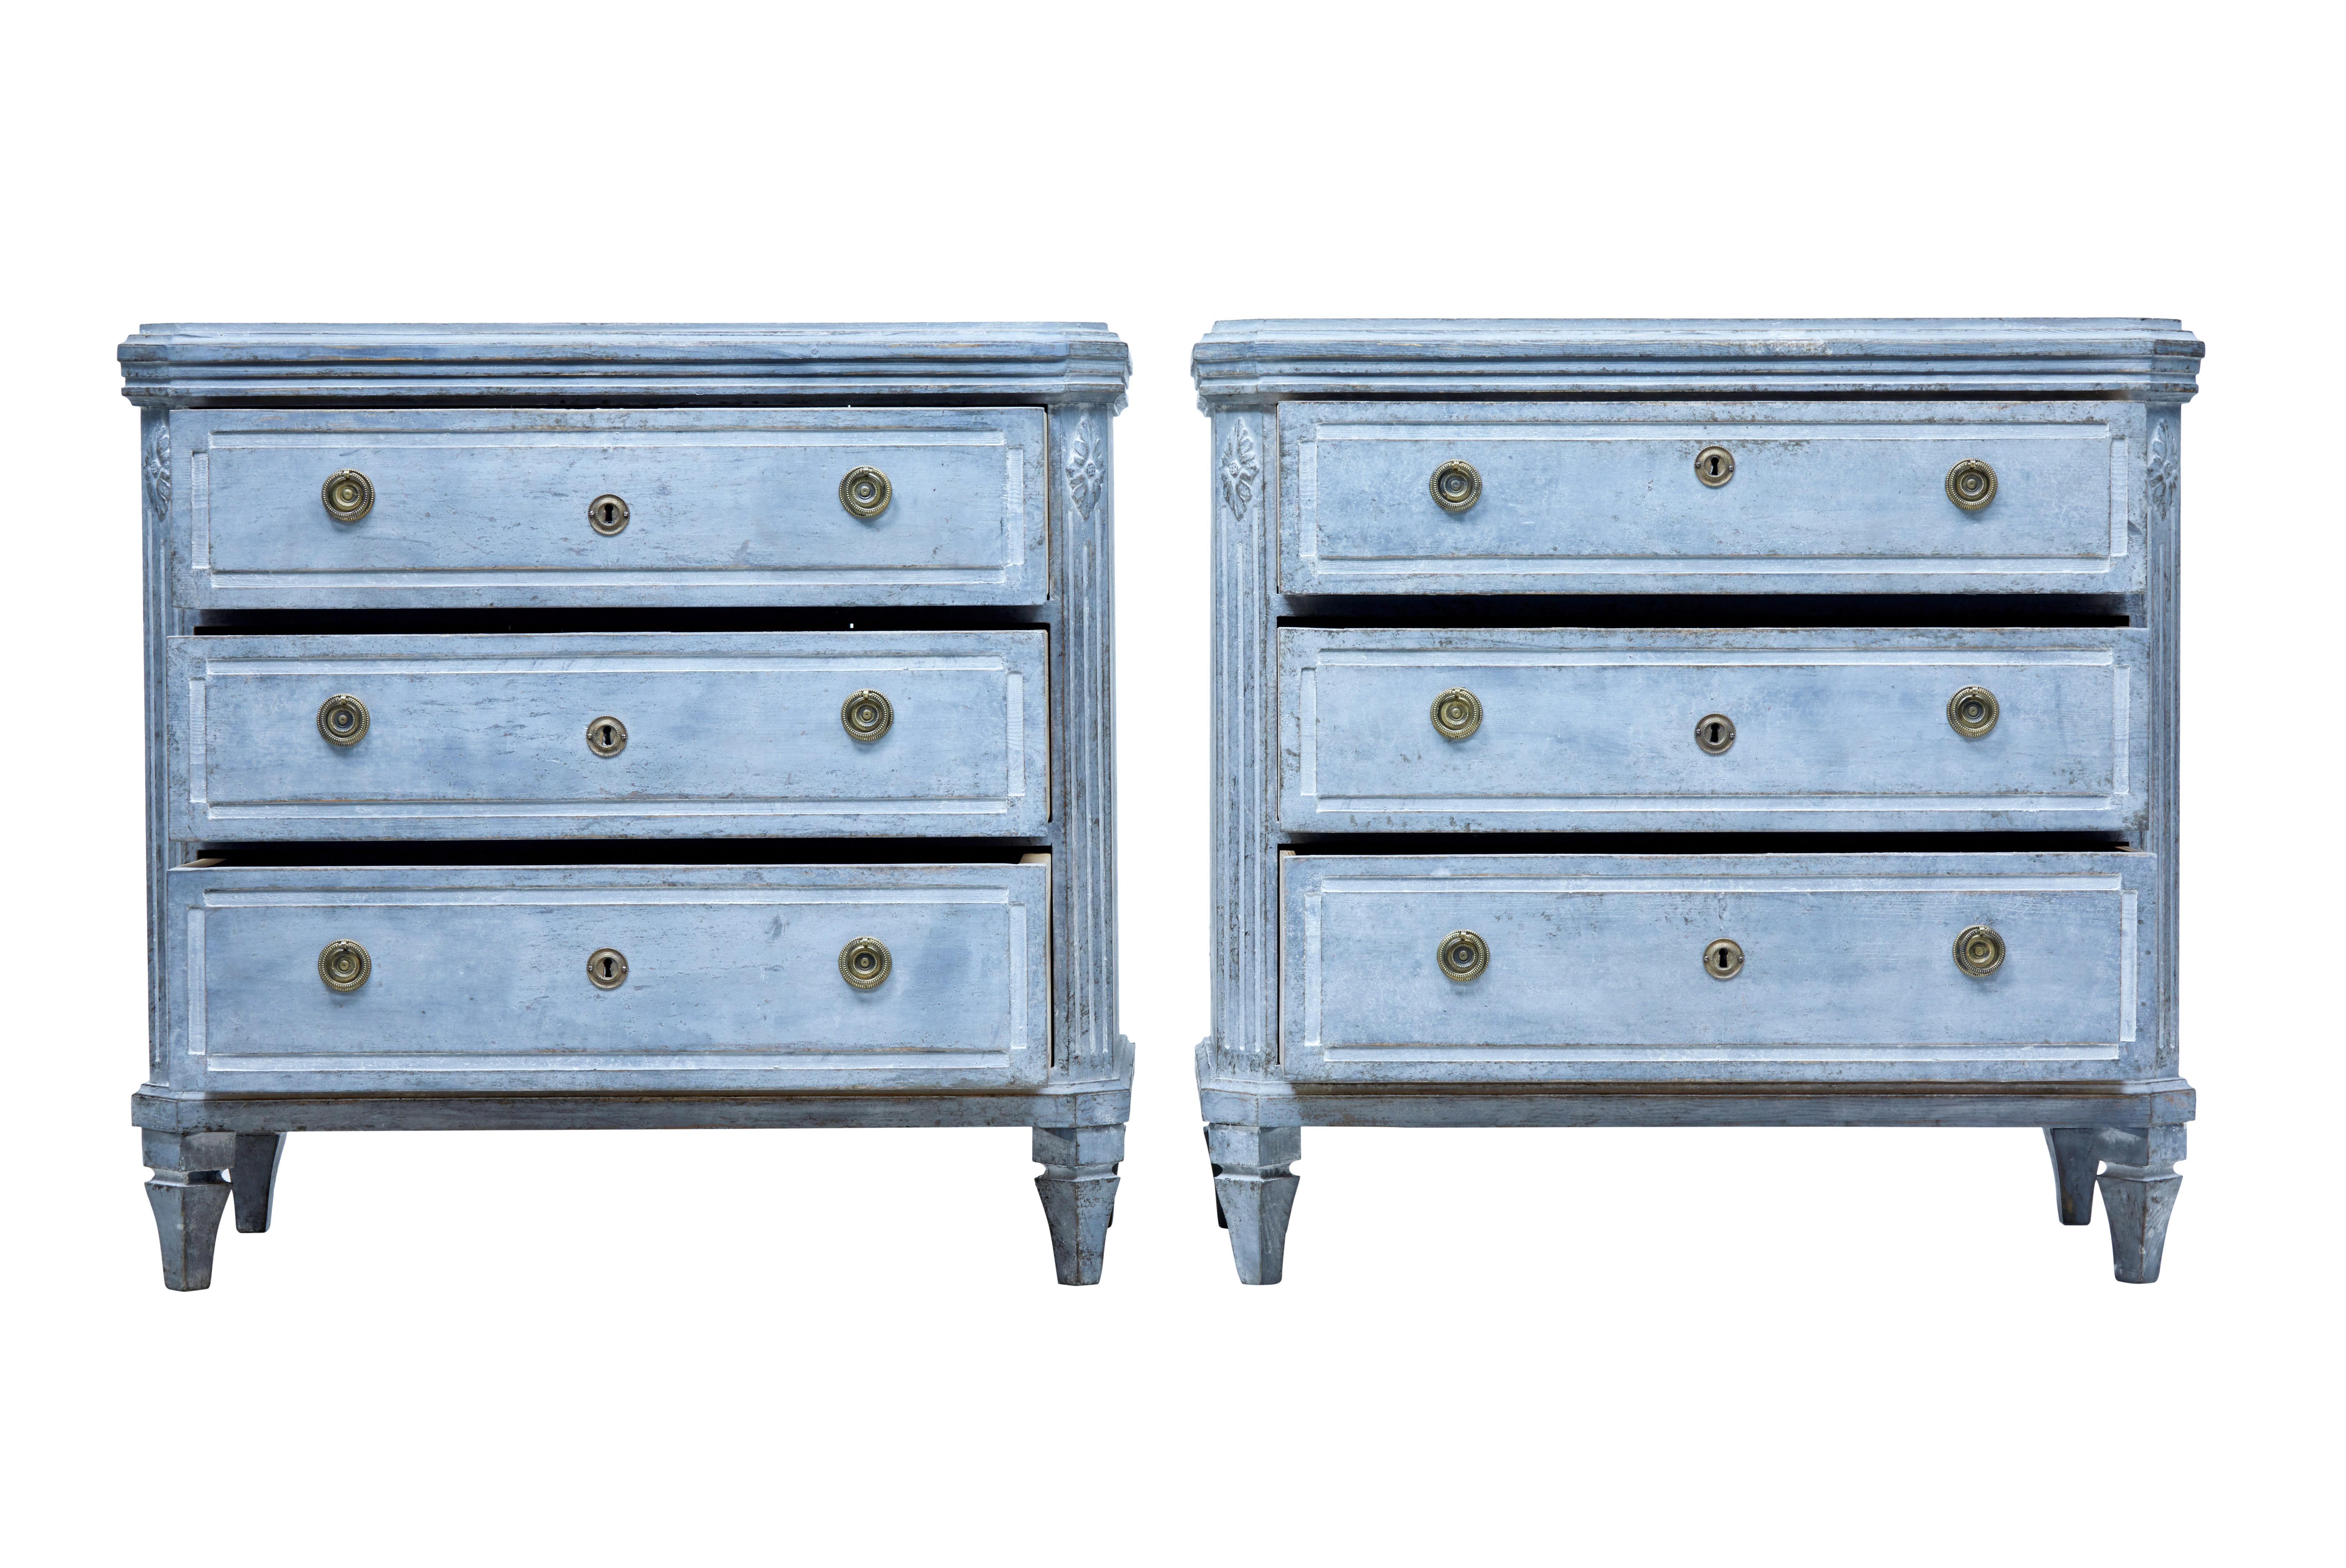 Fine pair of Gustavian inspired painted chest of drawers, circa 1870.

Three drawers with brass ring handles and escutheon, chanelled drawer fronts. Canted corners with applied molding and fluted detail.

Later paint which has now taken on a